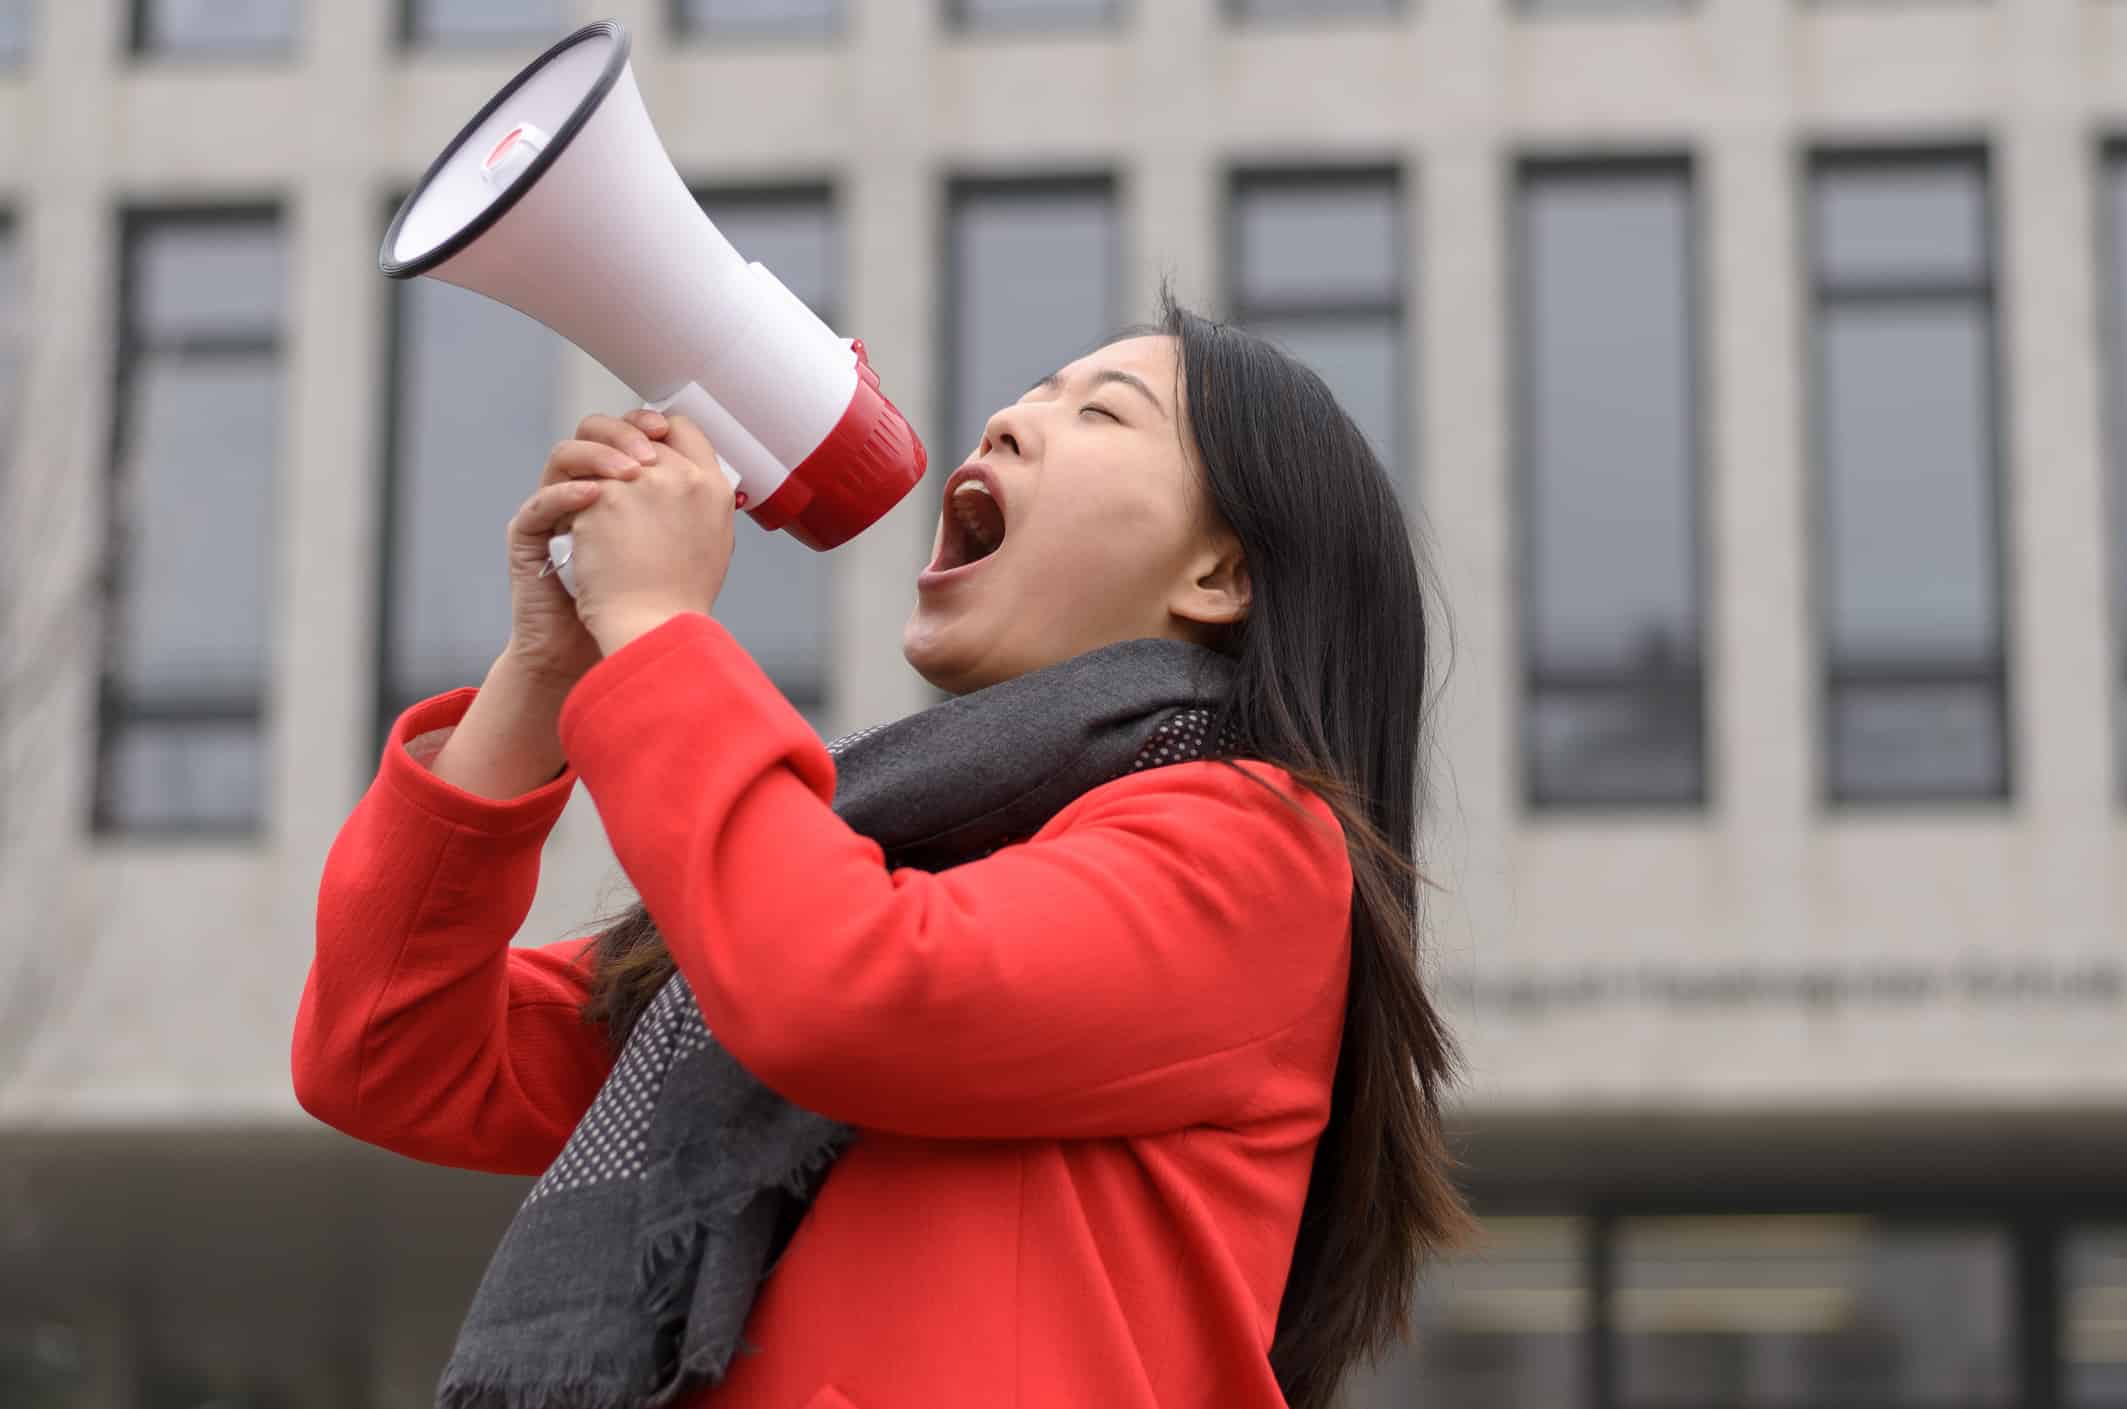 Asian woman in red coat shouting into megaphone.